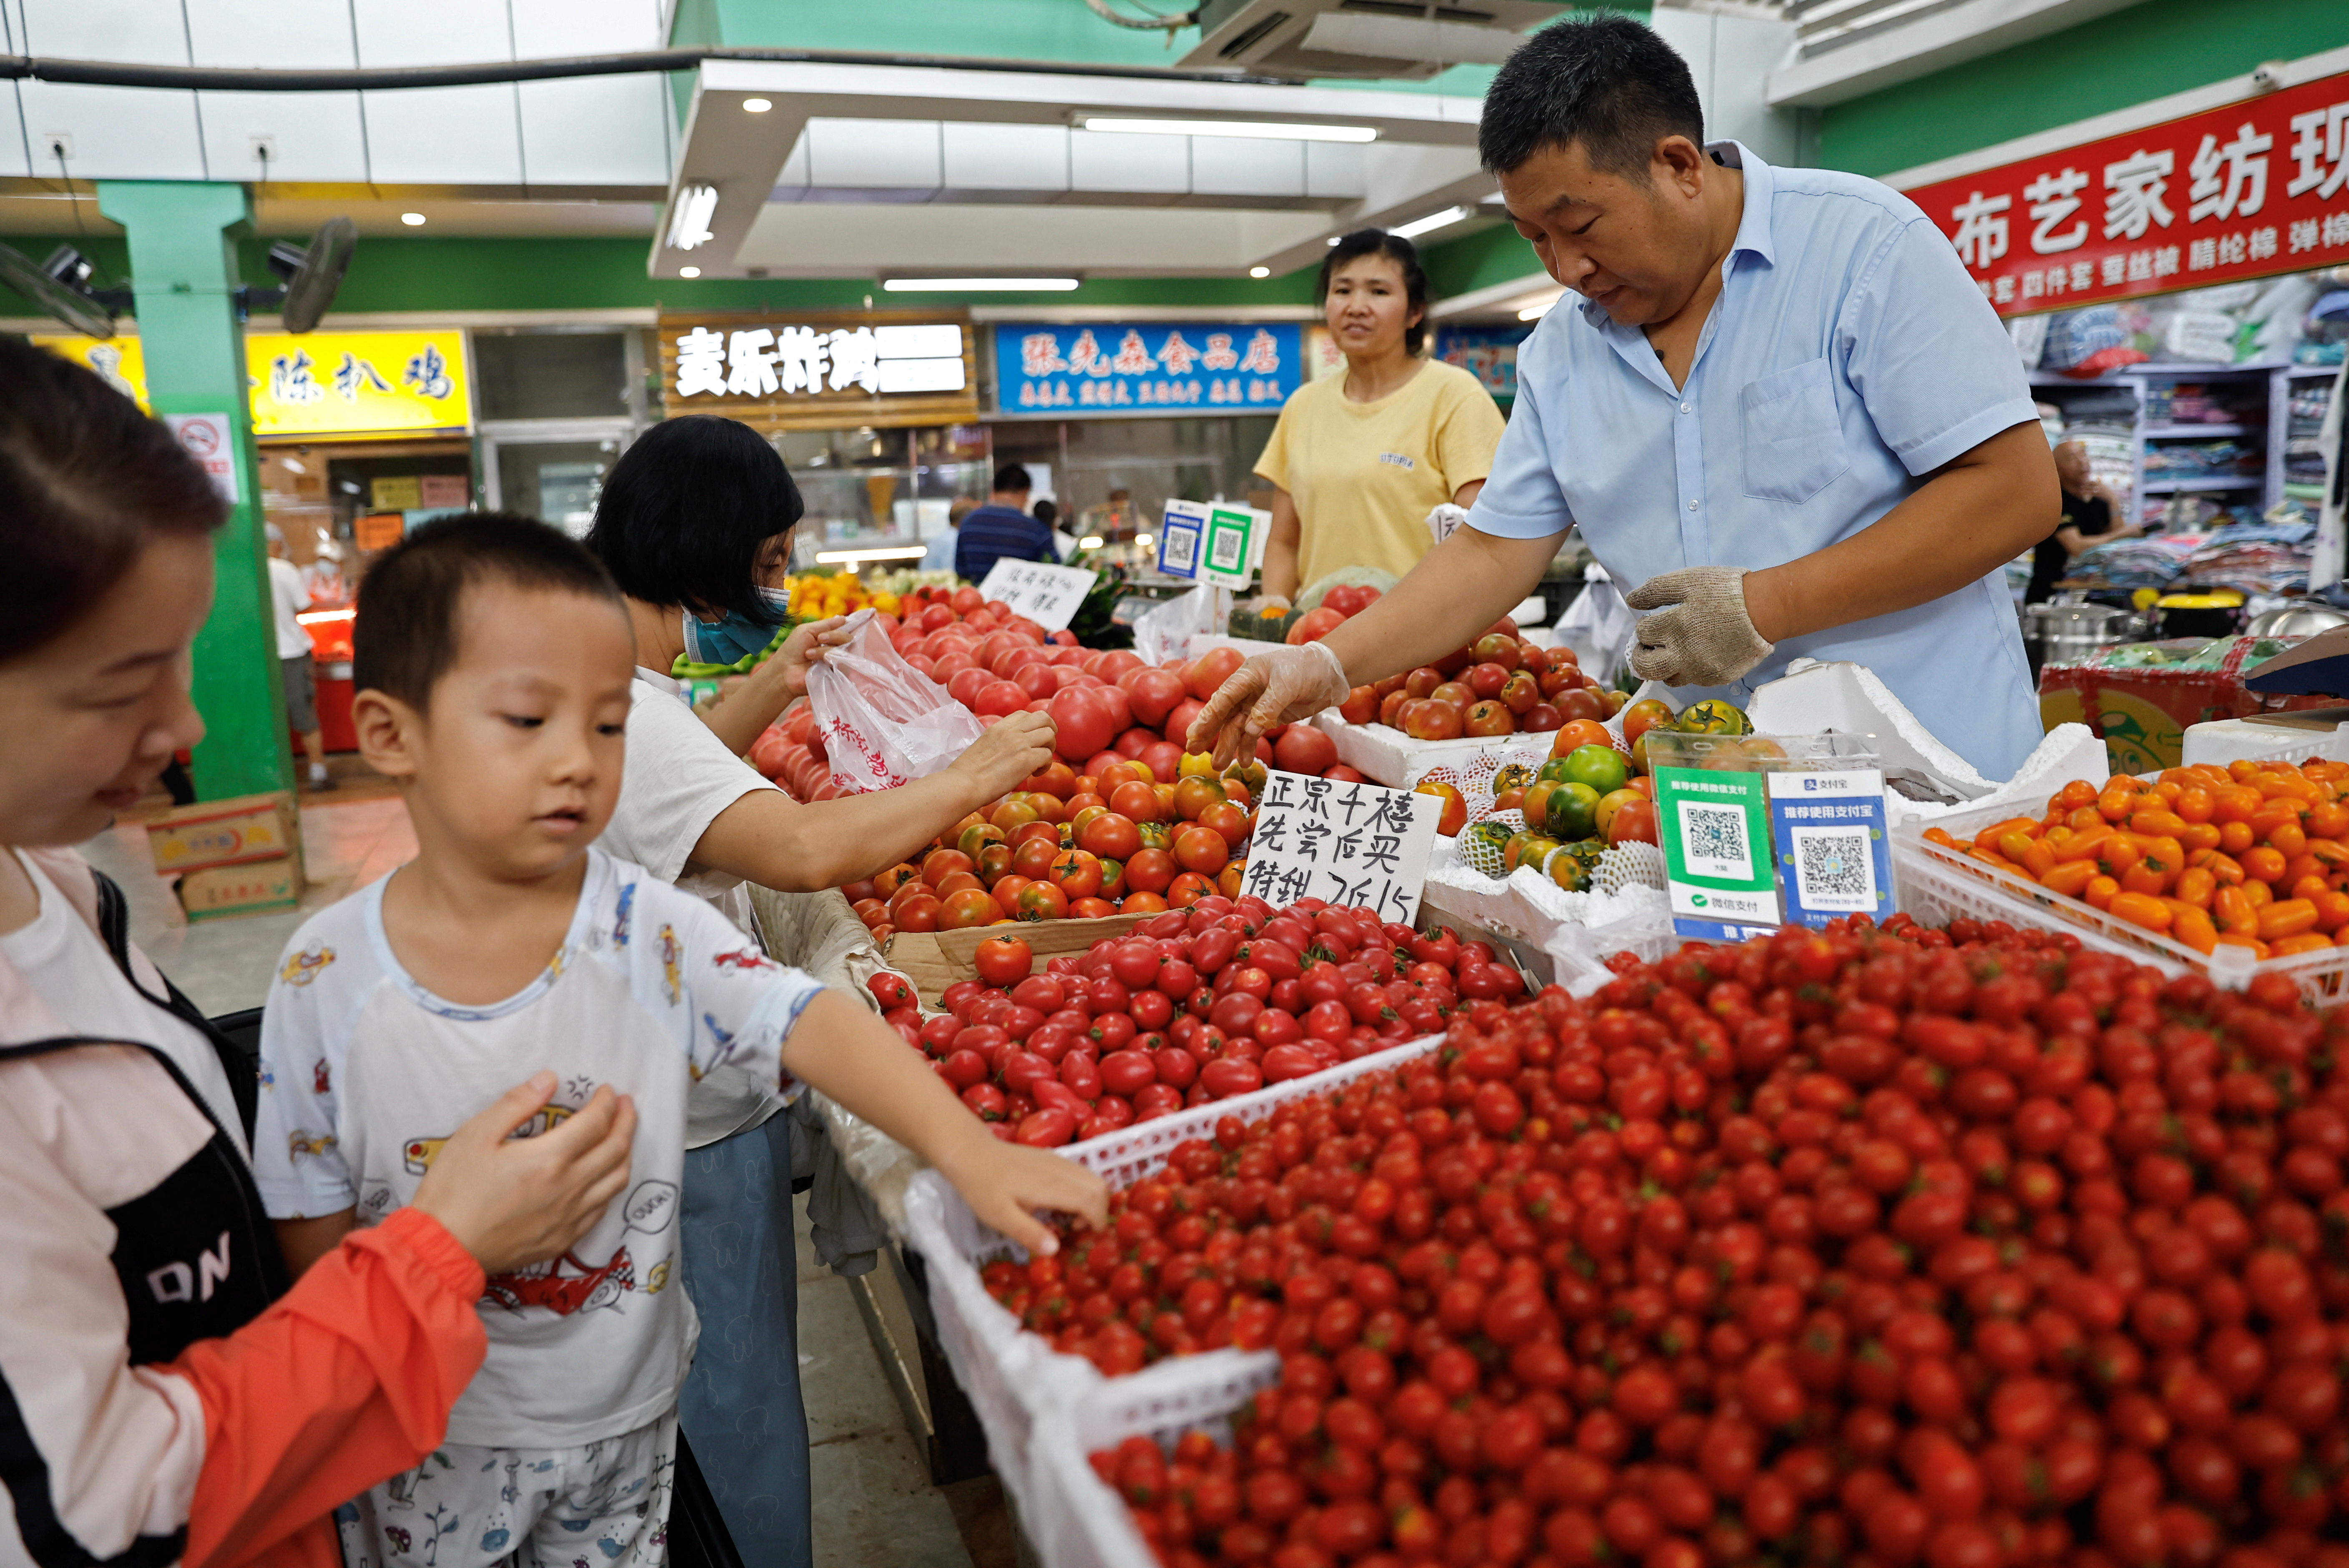 Customers select tomatoes at a stall inside a morning market in Beijing